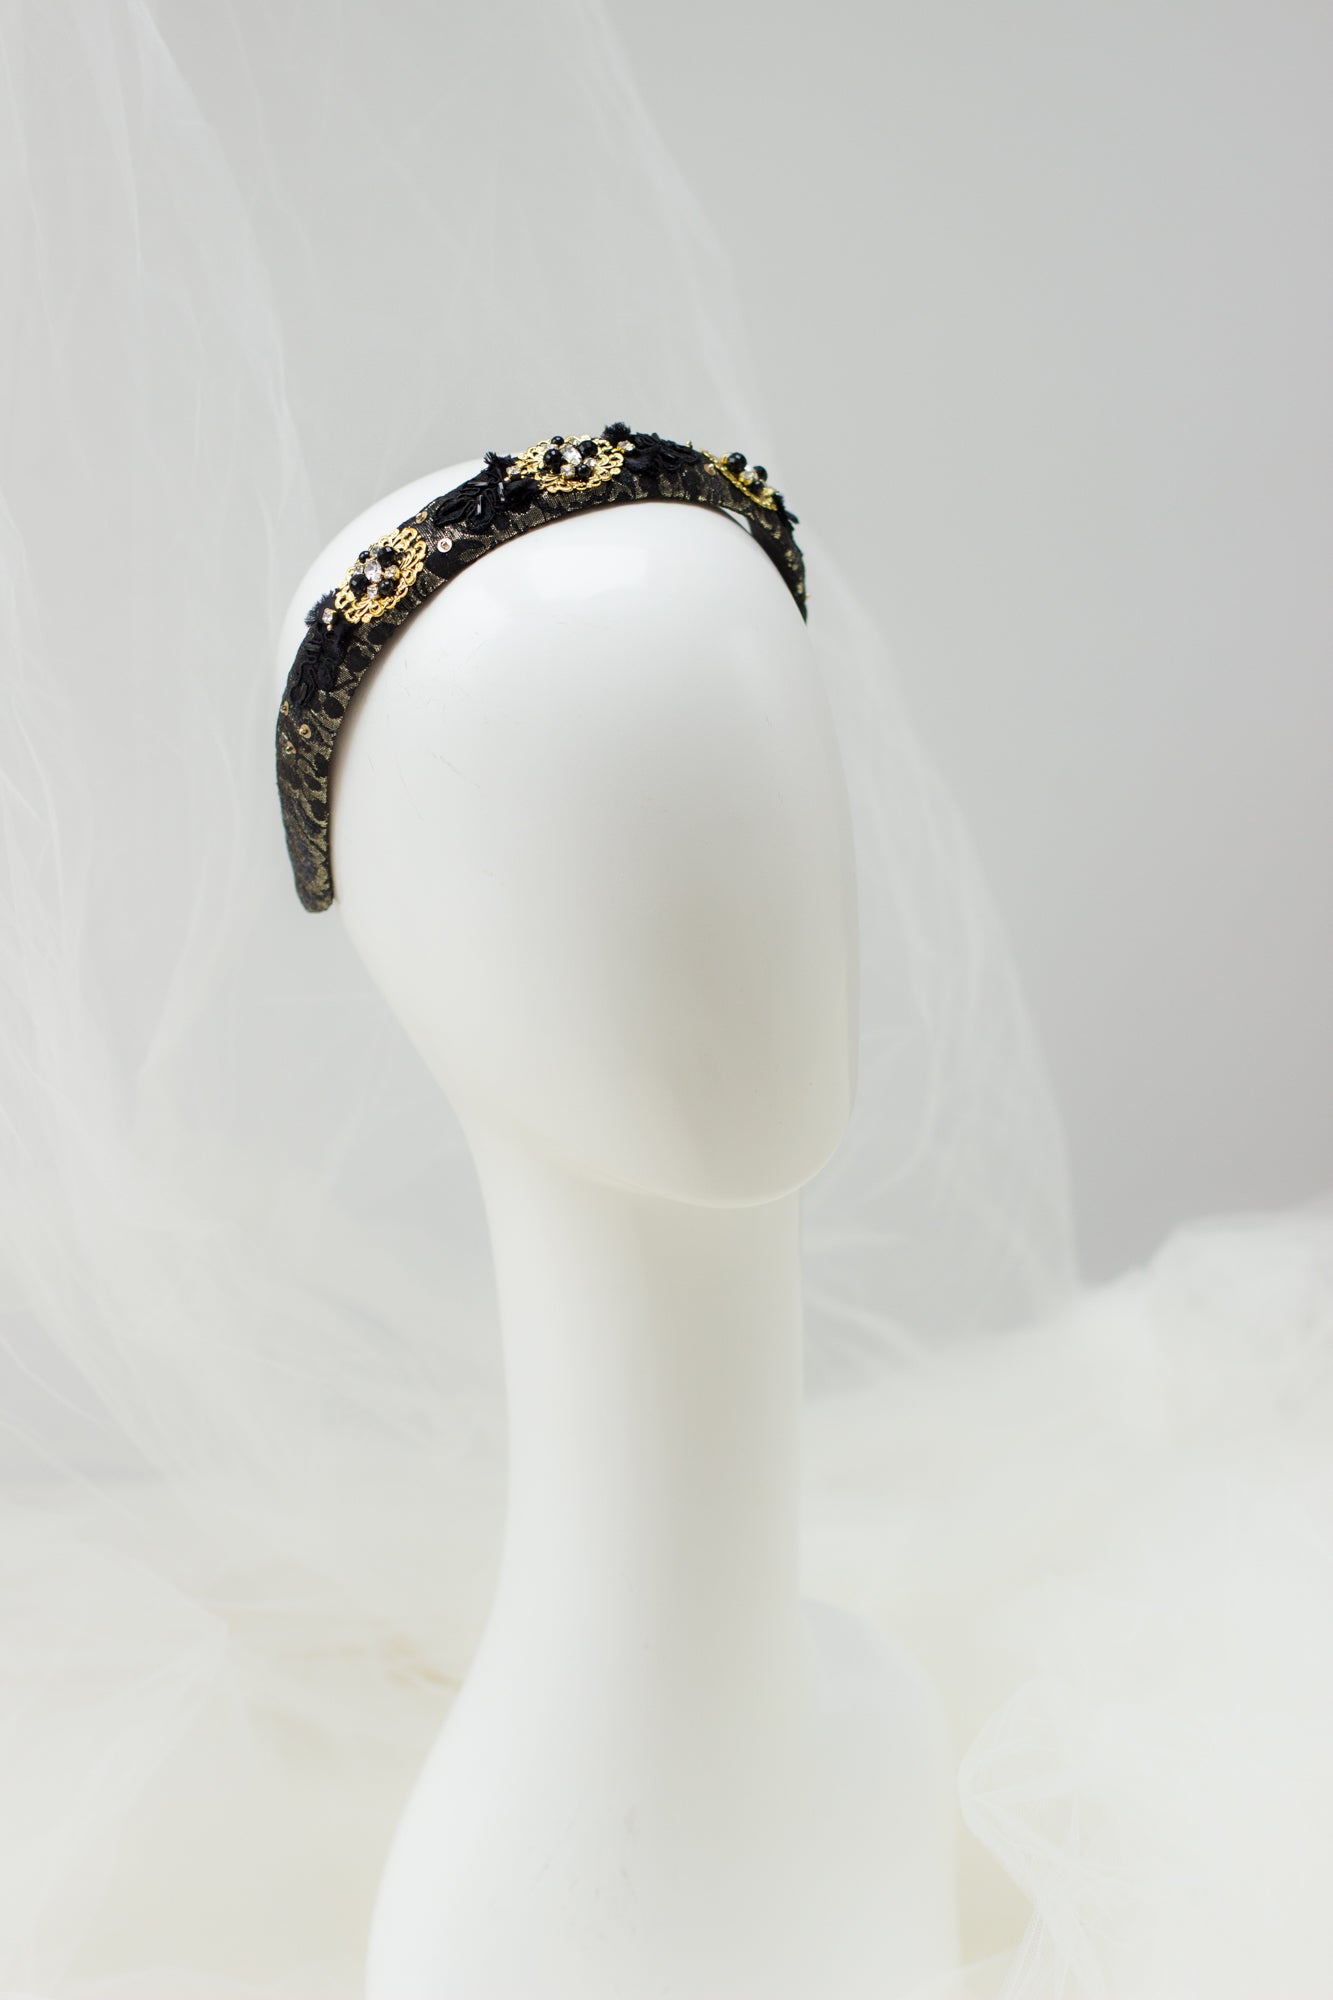 Black Gold embroidered headband. Premium accessories. Excellent gift. A versatile accessory that's a must-have in every wardrobe. Handmade hair accessories. OOAK accessories. Lace headpiece. Gift idea. Fashion accessories. Fascinator